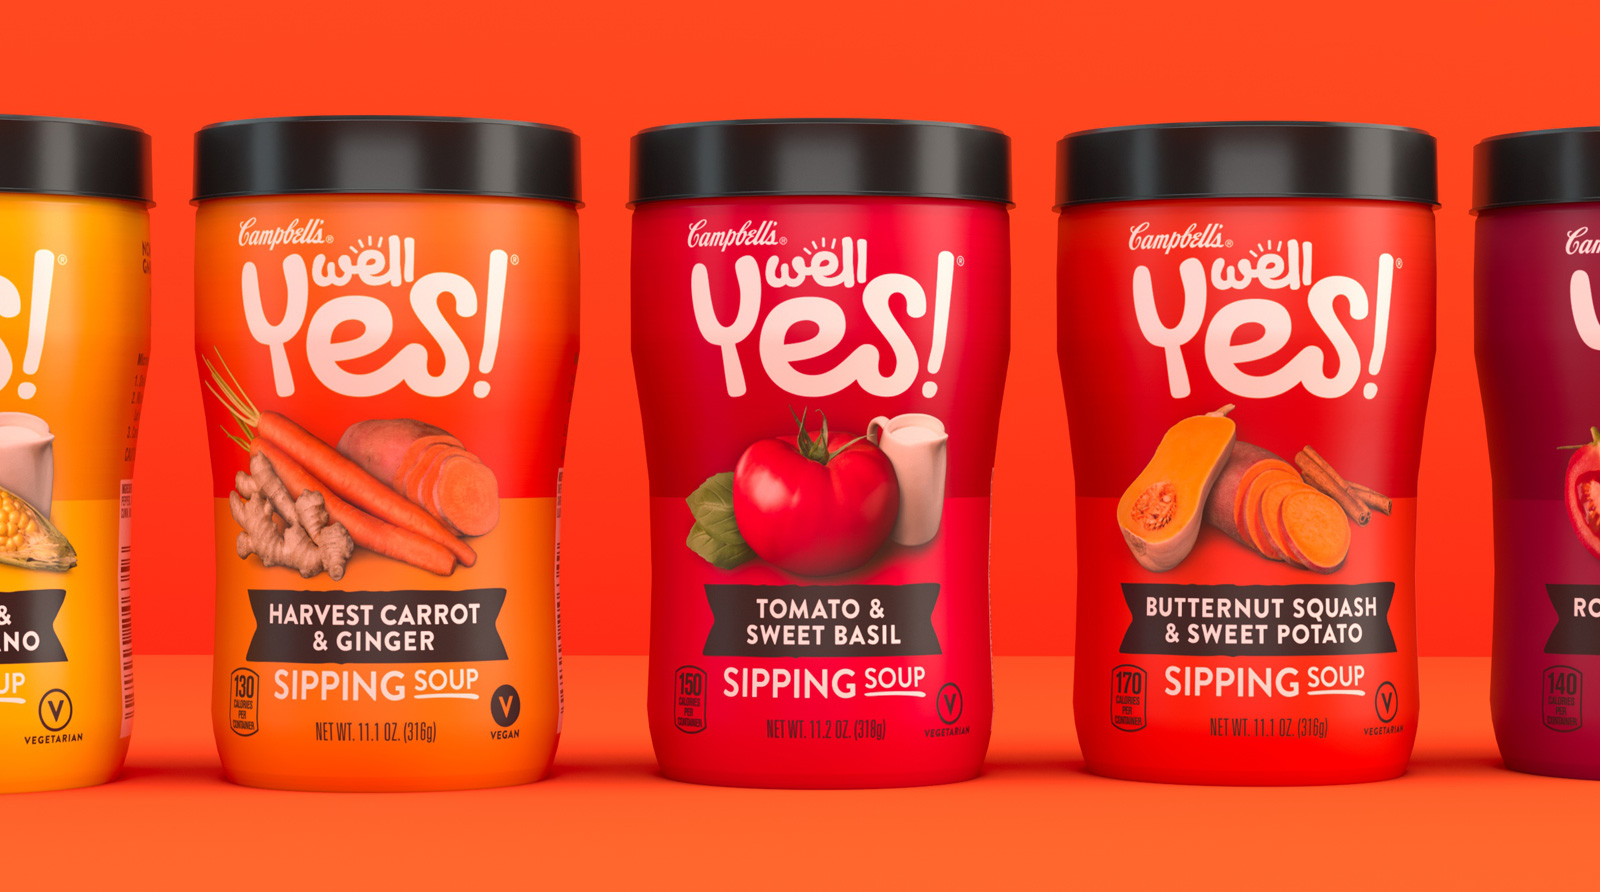 Campbell's Well Yes Sipping Soups